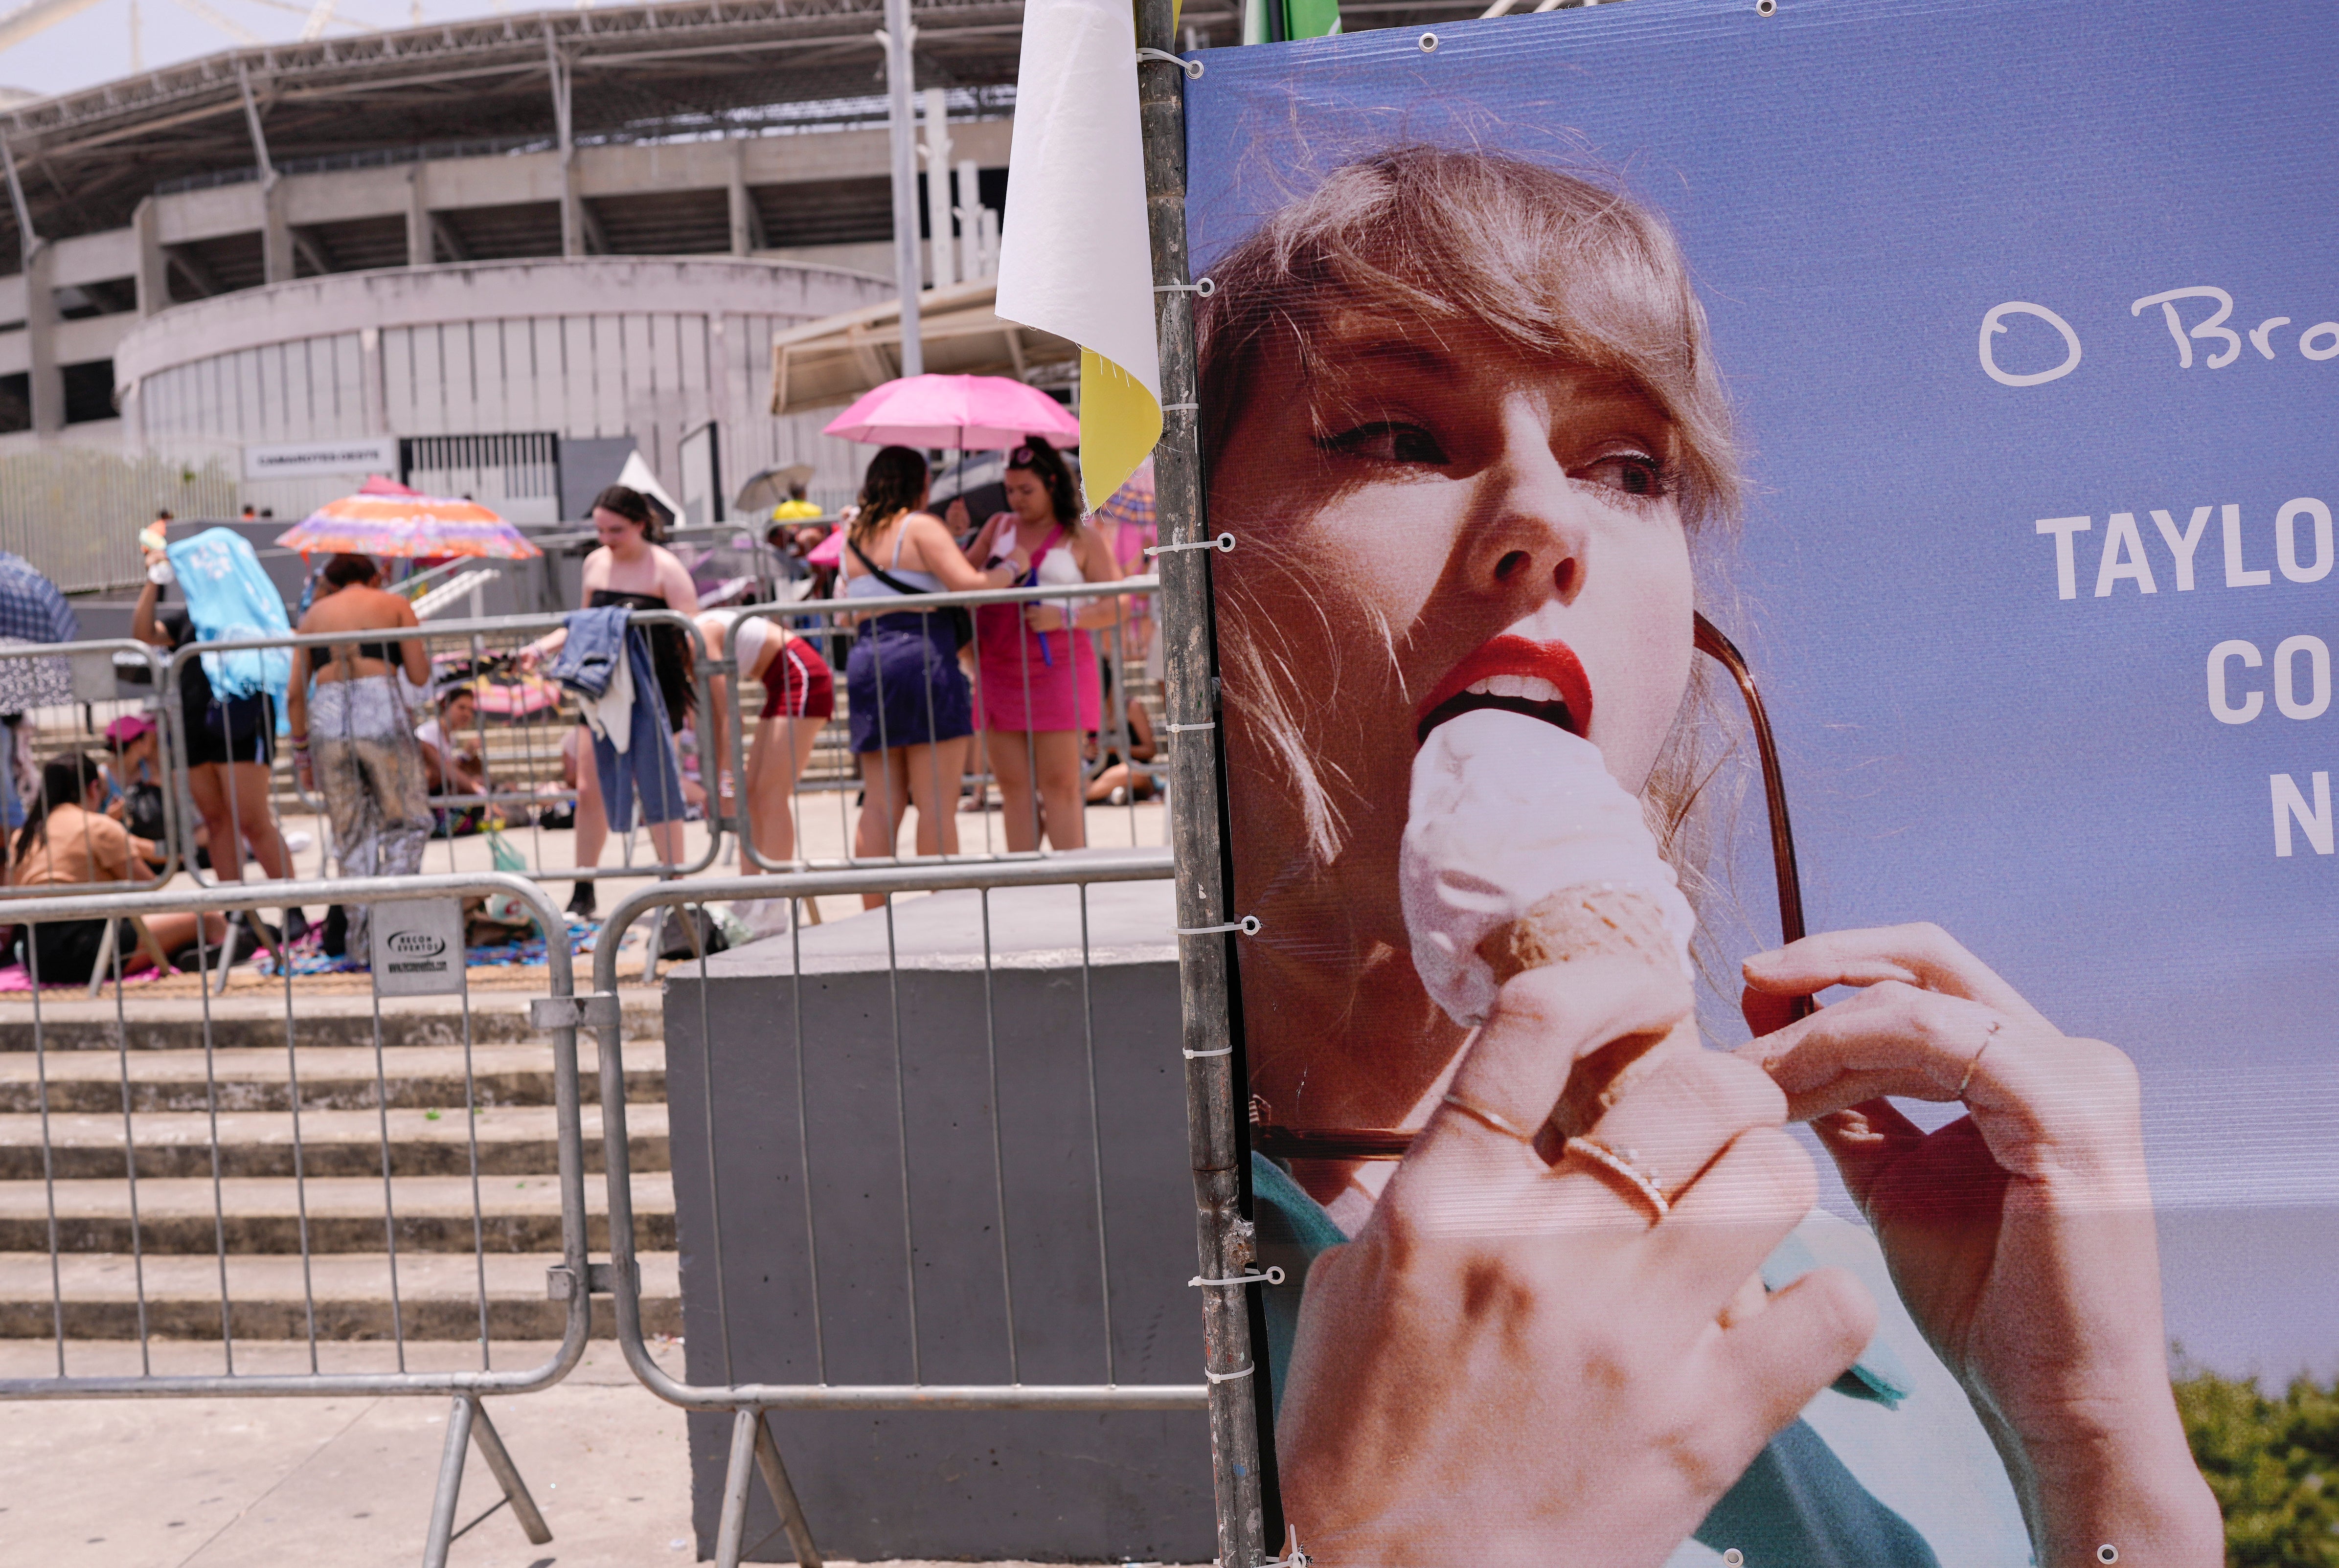 Taylor Swift fans wait for the doors of Nilton Santos Olympic stadium to open for her Eras Tour concert amid a heat wave